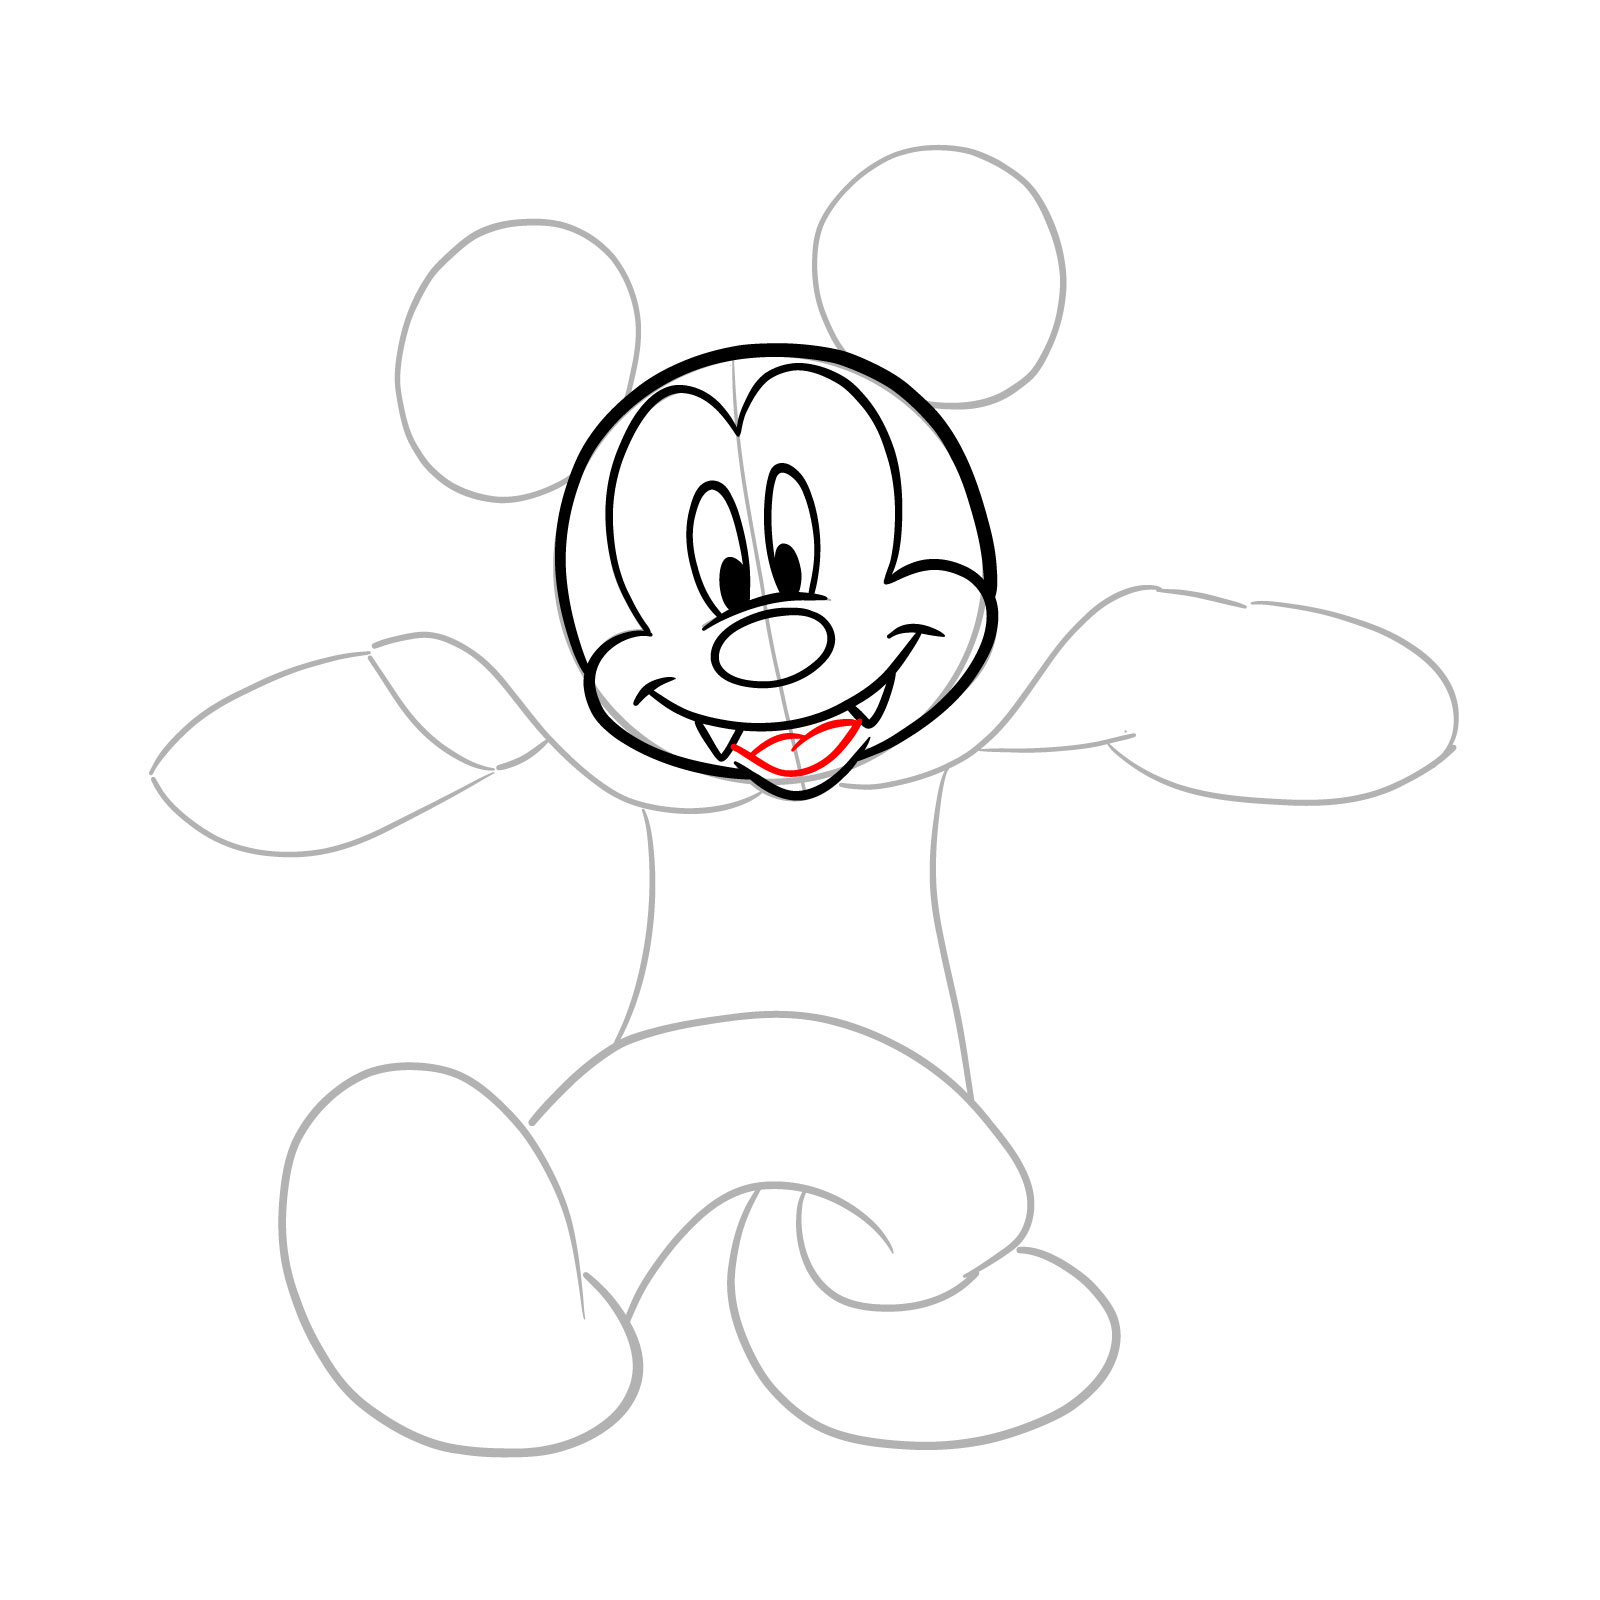 How to draw Dracula Mickey Mouse - step 10